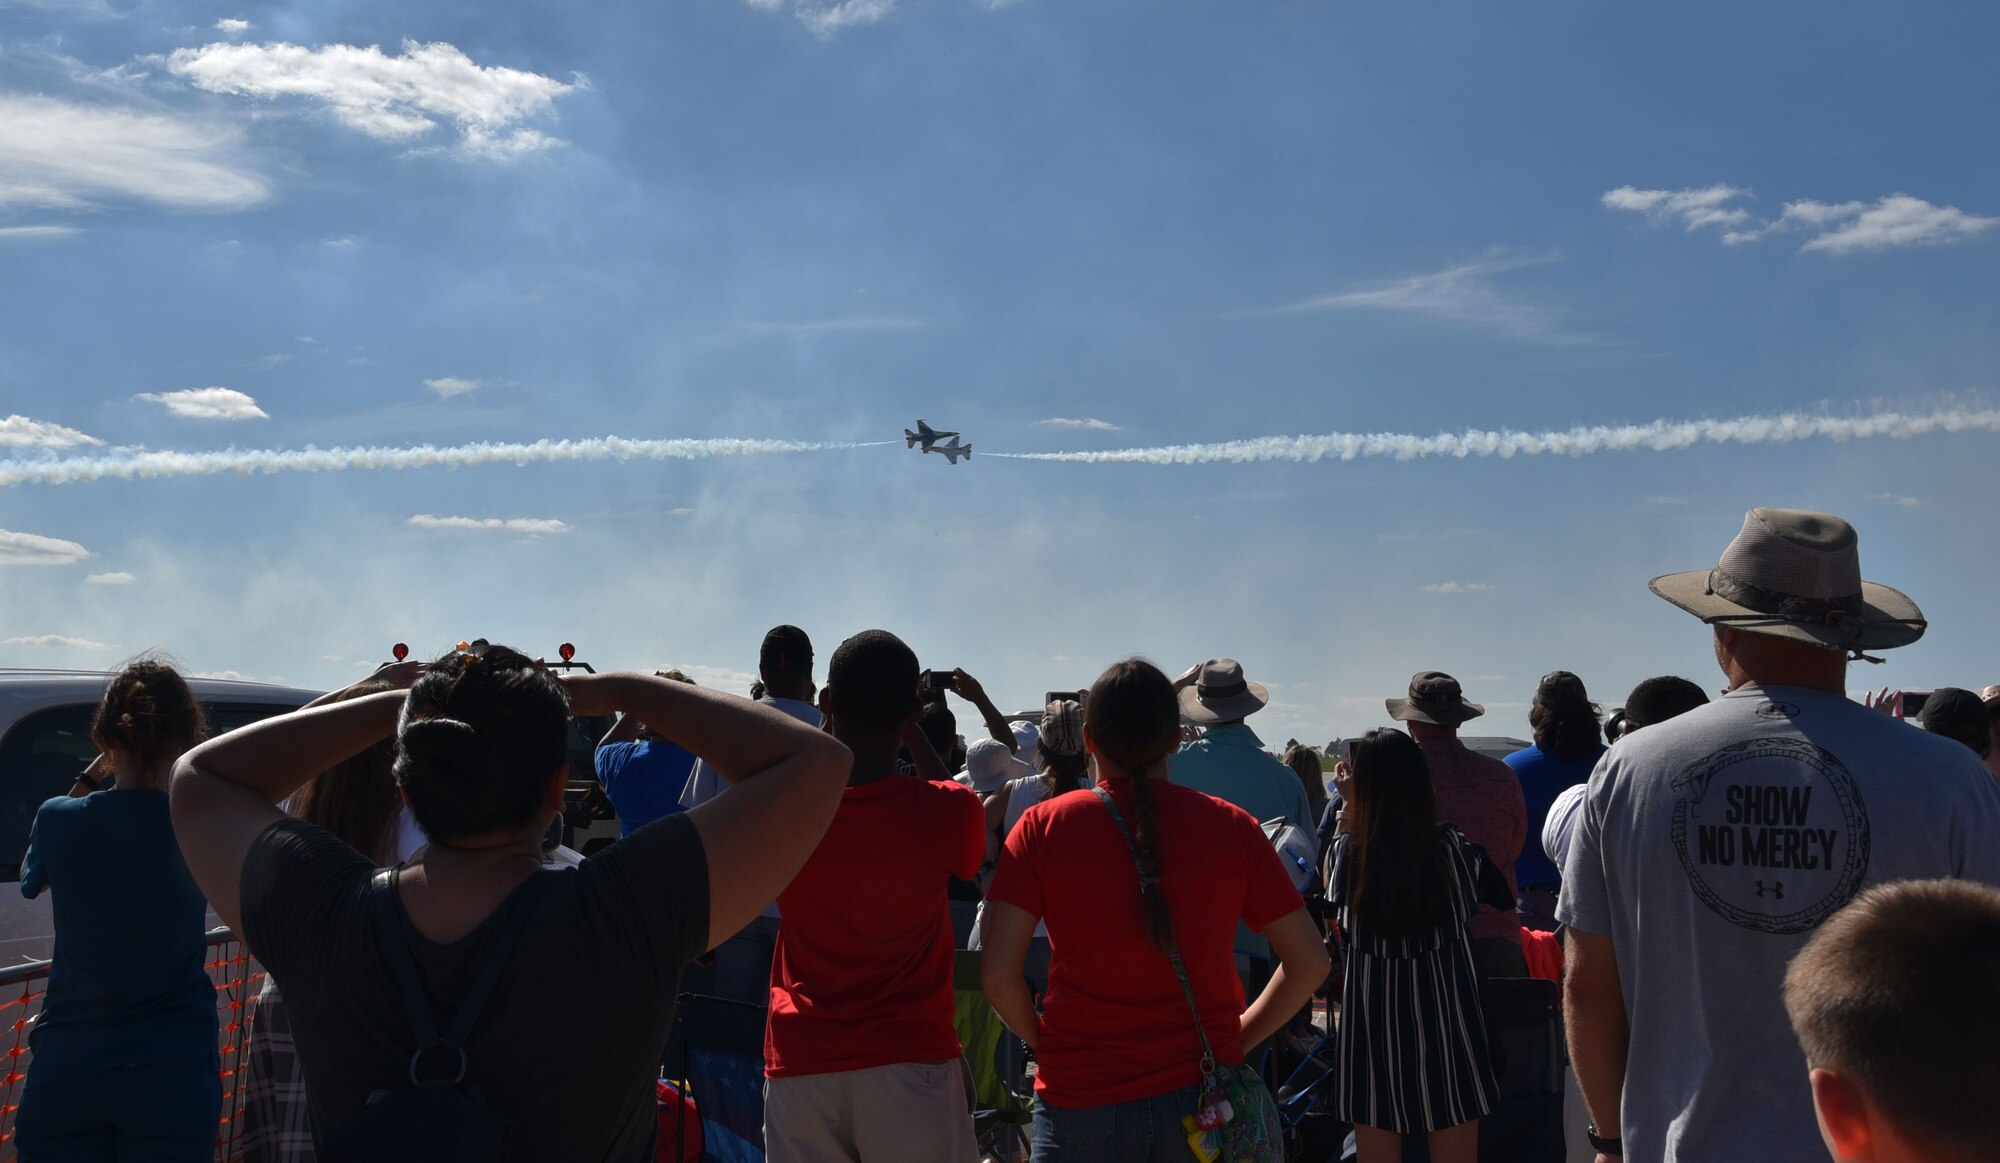 Guests watch as the he U.S. Air Force Thunderbirds perform at the Frontiers in Flight Open House and Airshow Sept. 9, 2018, McConnell Air Force Base, Kan. This was the first time the Thunderbirds had performed at McConnell since 2012.  (U.S. Air Force photo by Tech. Sgt. Abigail Klein)